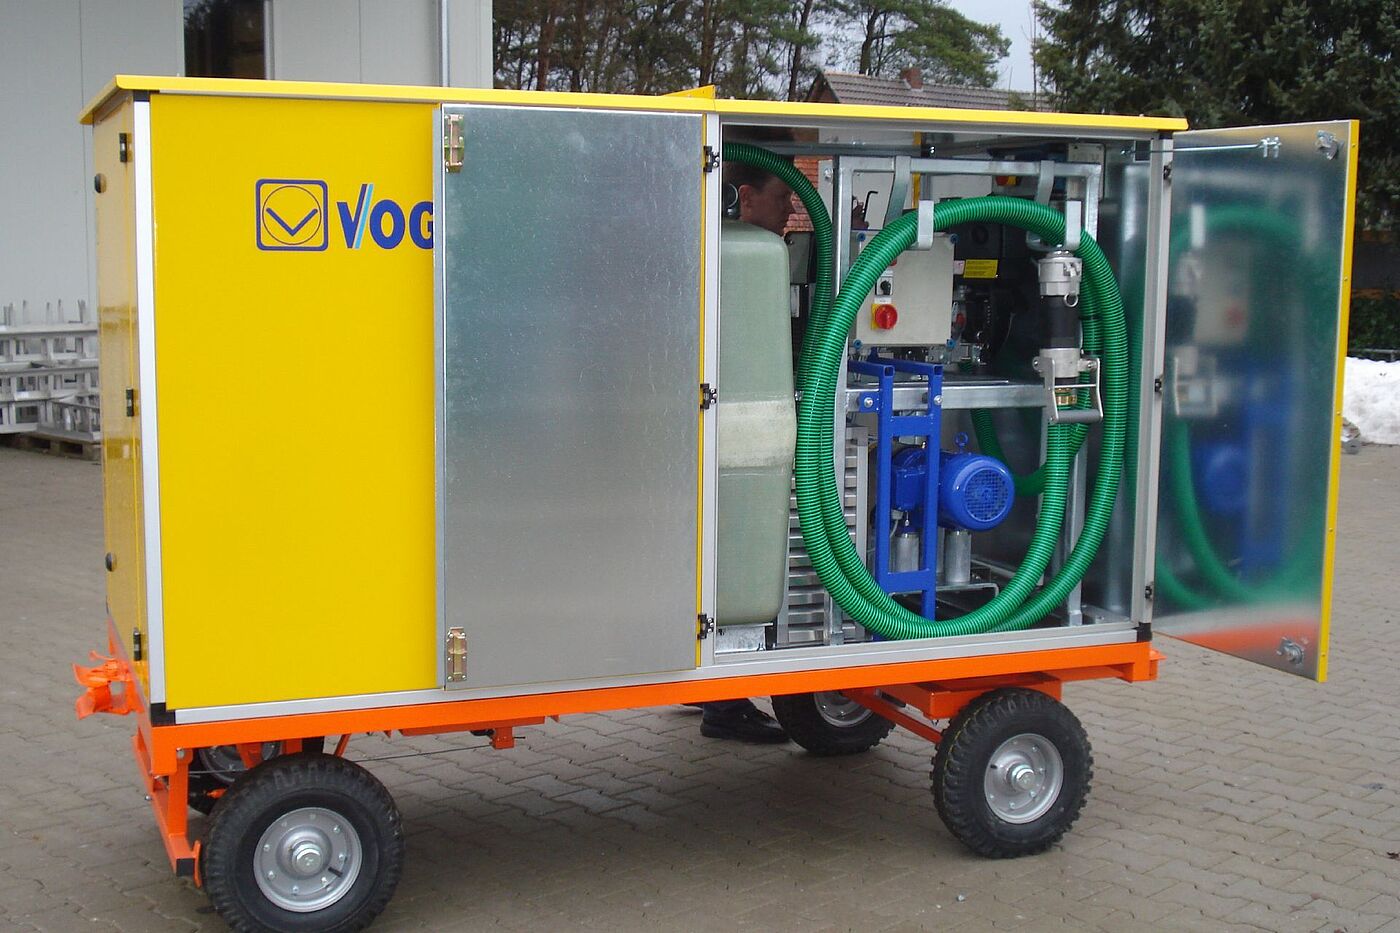 MobileUnit M30, the mobile wastewater disposal system